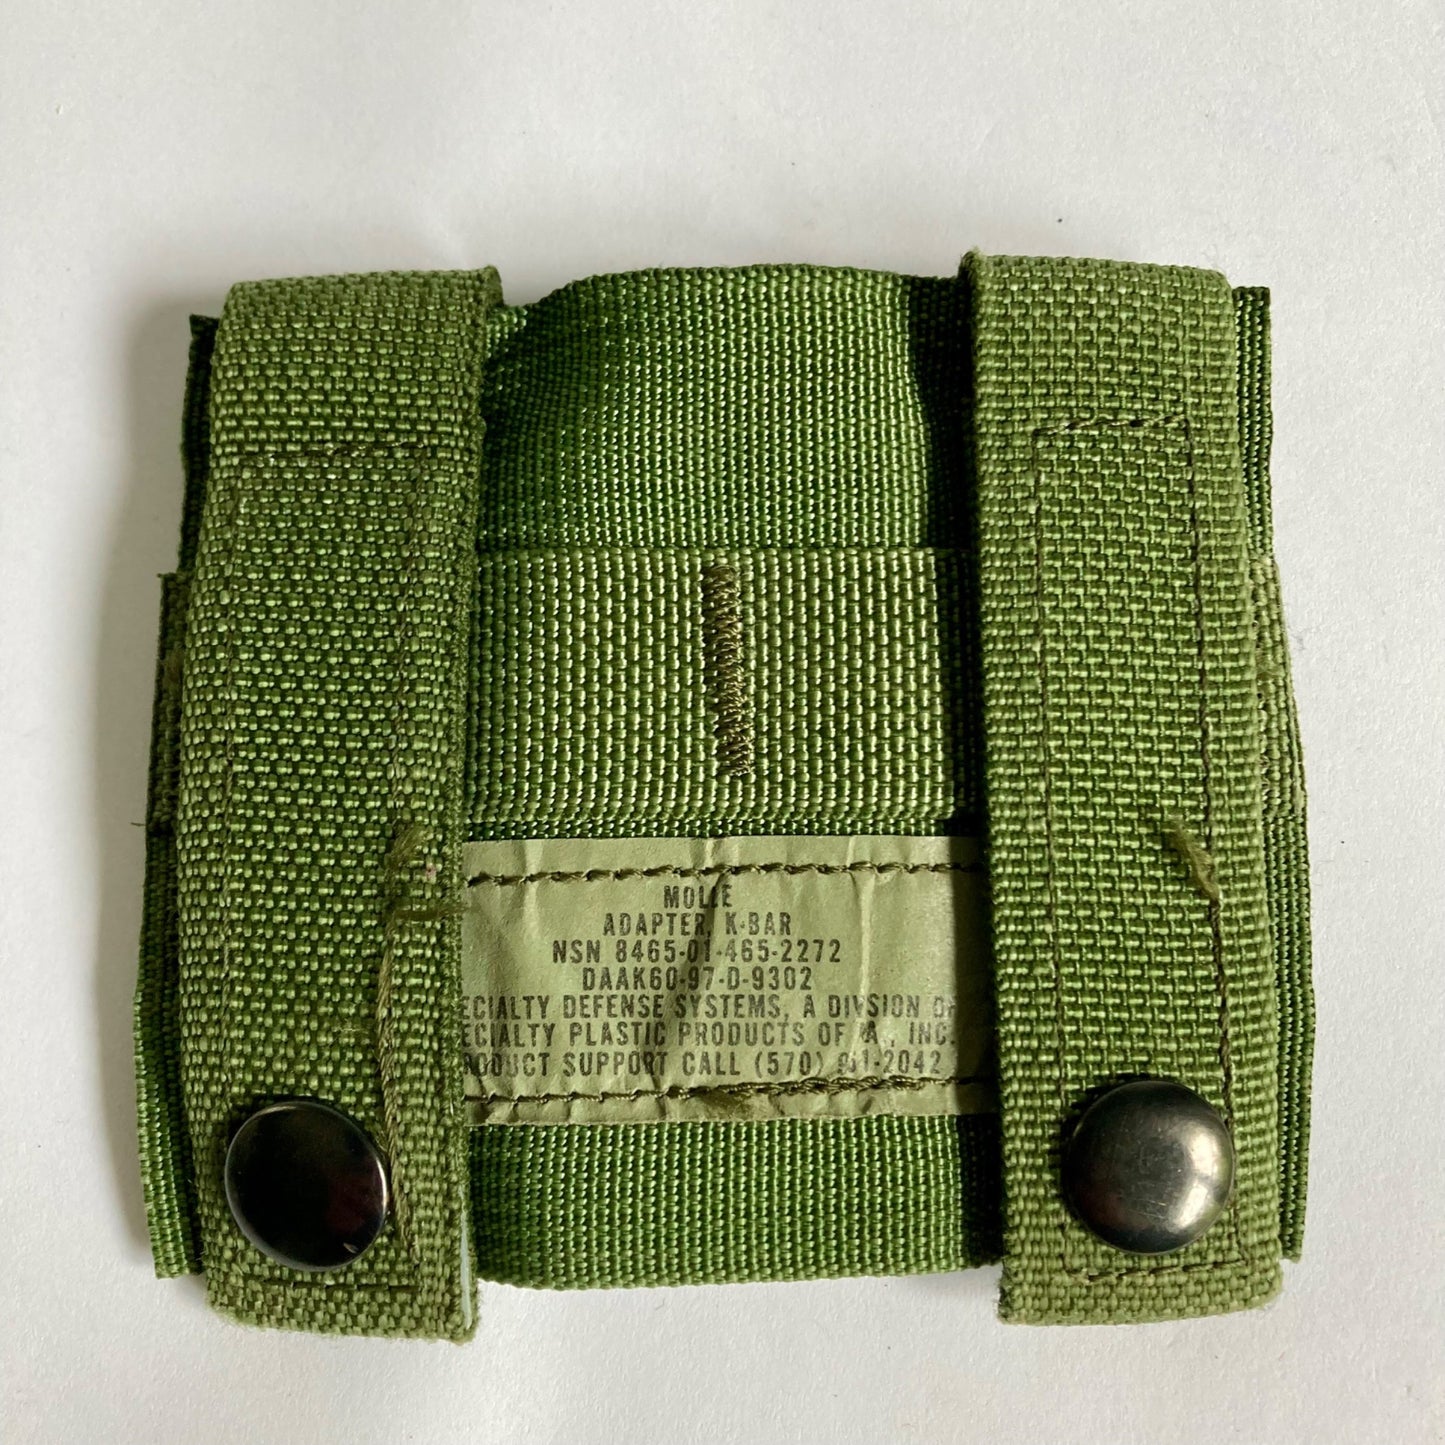 MOLLE Adapter K-Bar OD Green Knife Holder US Military Army